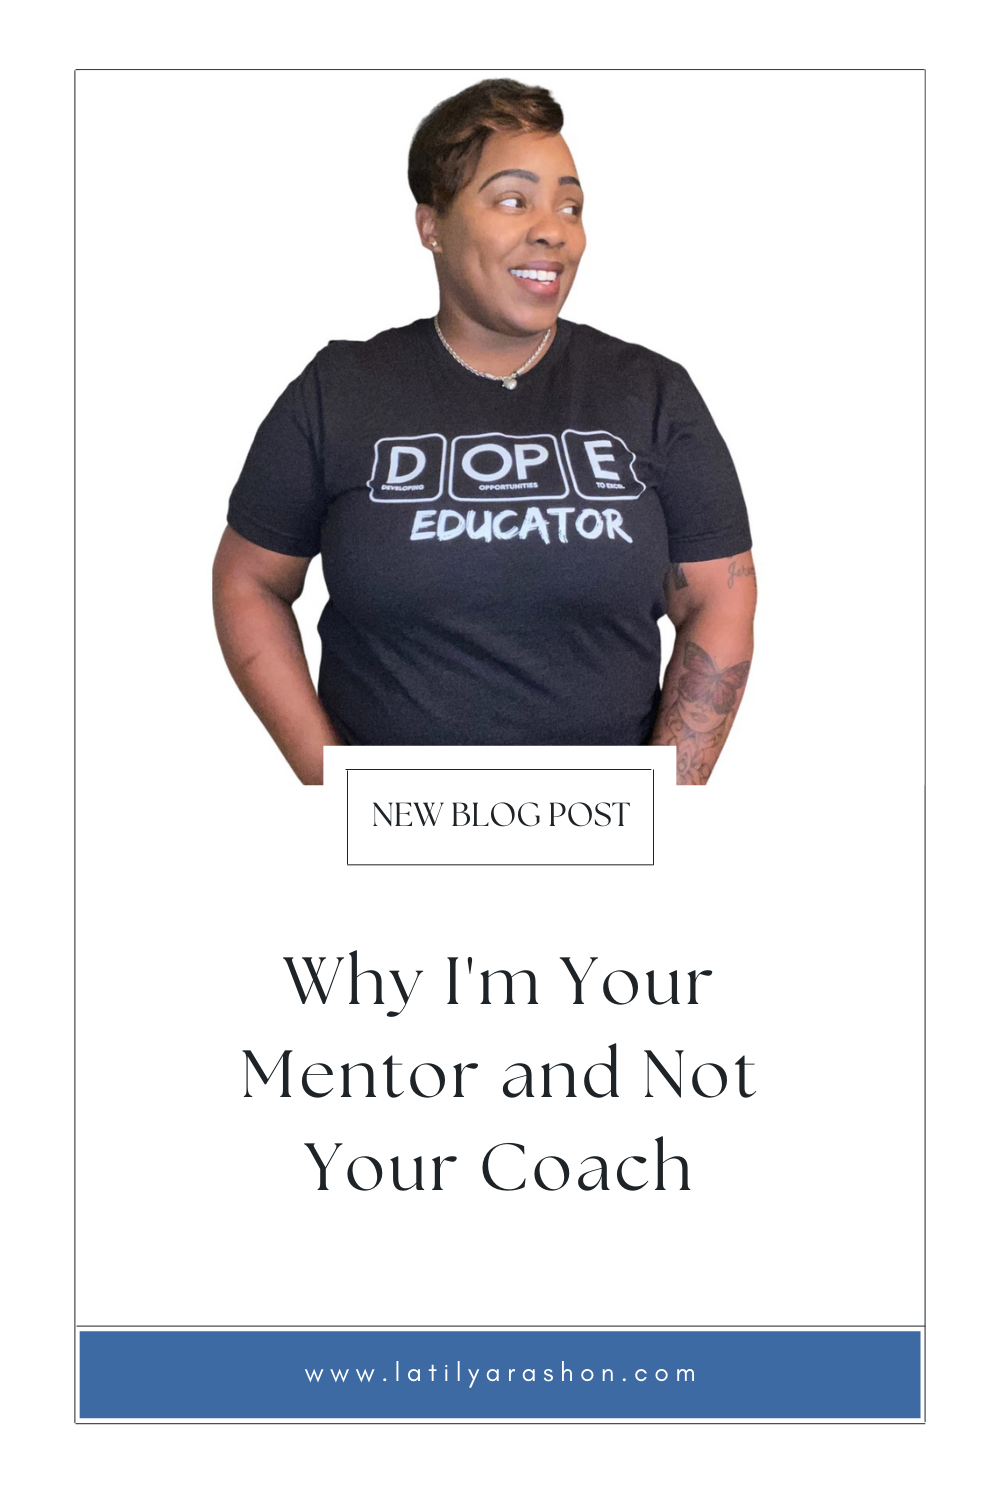 Why I'm Your Mentor and Not Your Coach